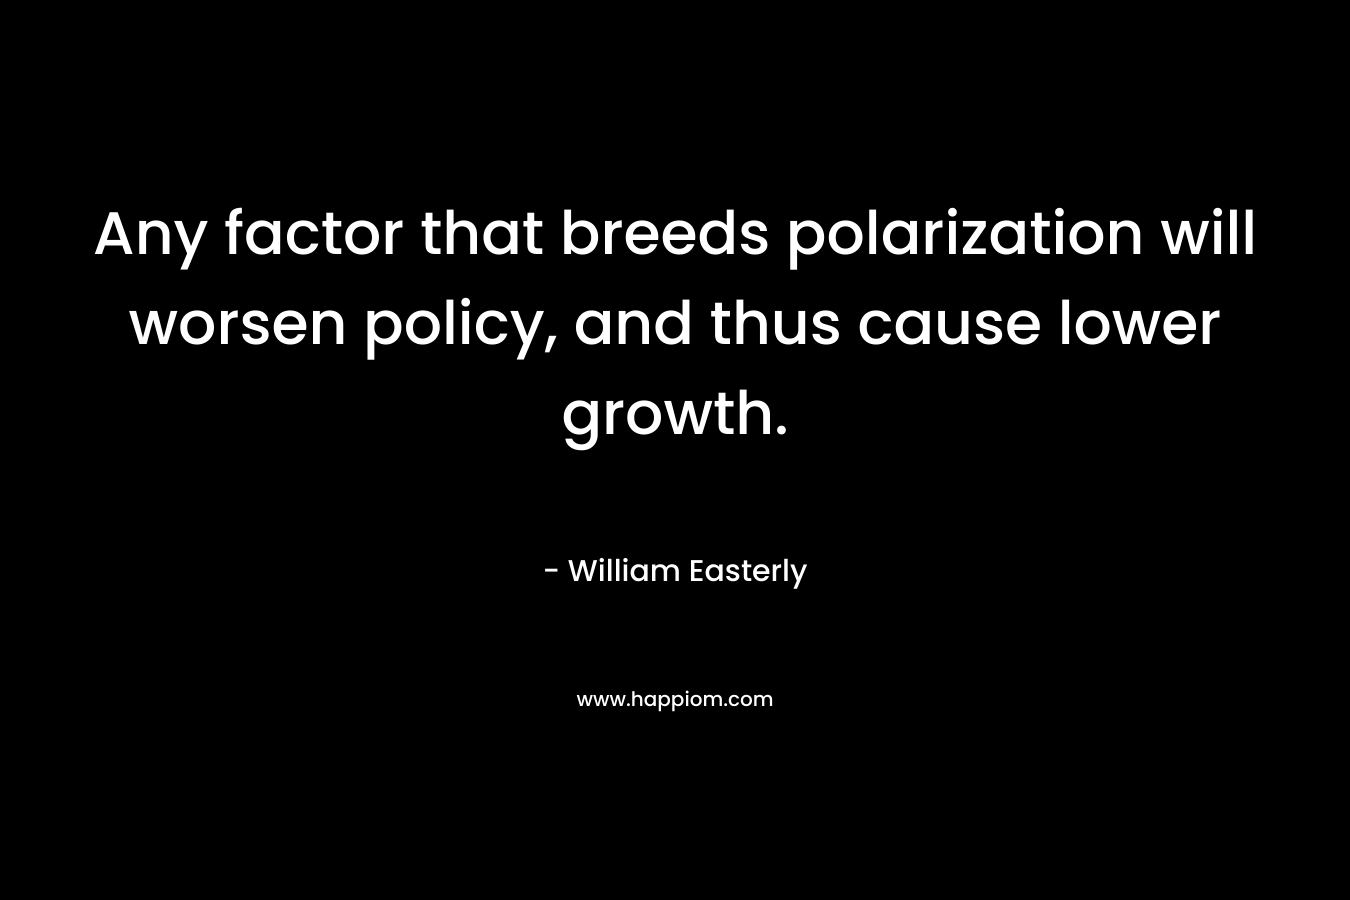 Any factor that breeds polarization will worsen policy, and thus cause lower growth.